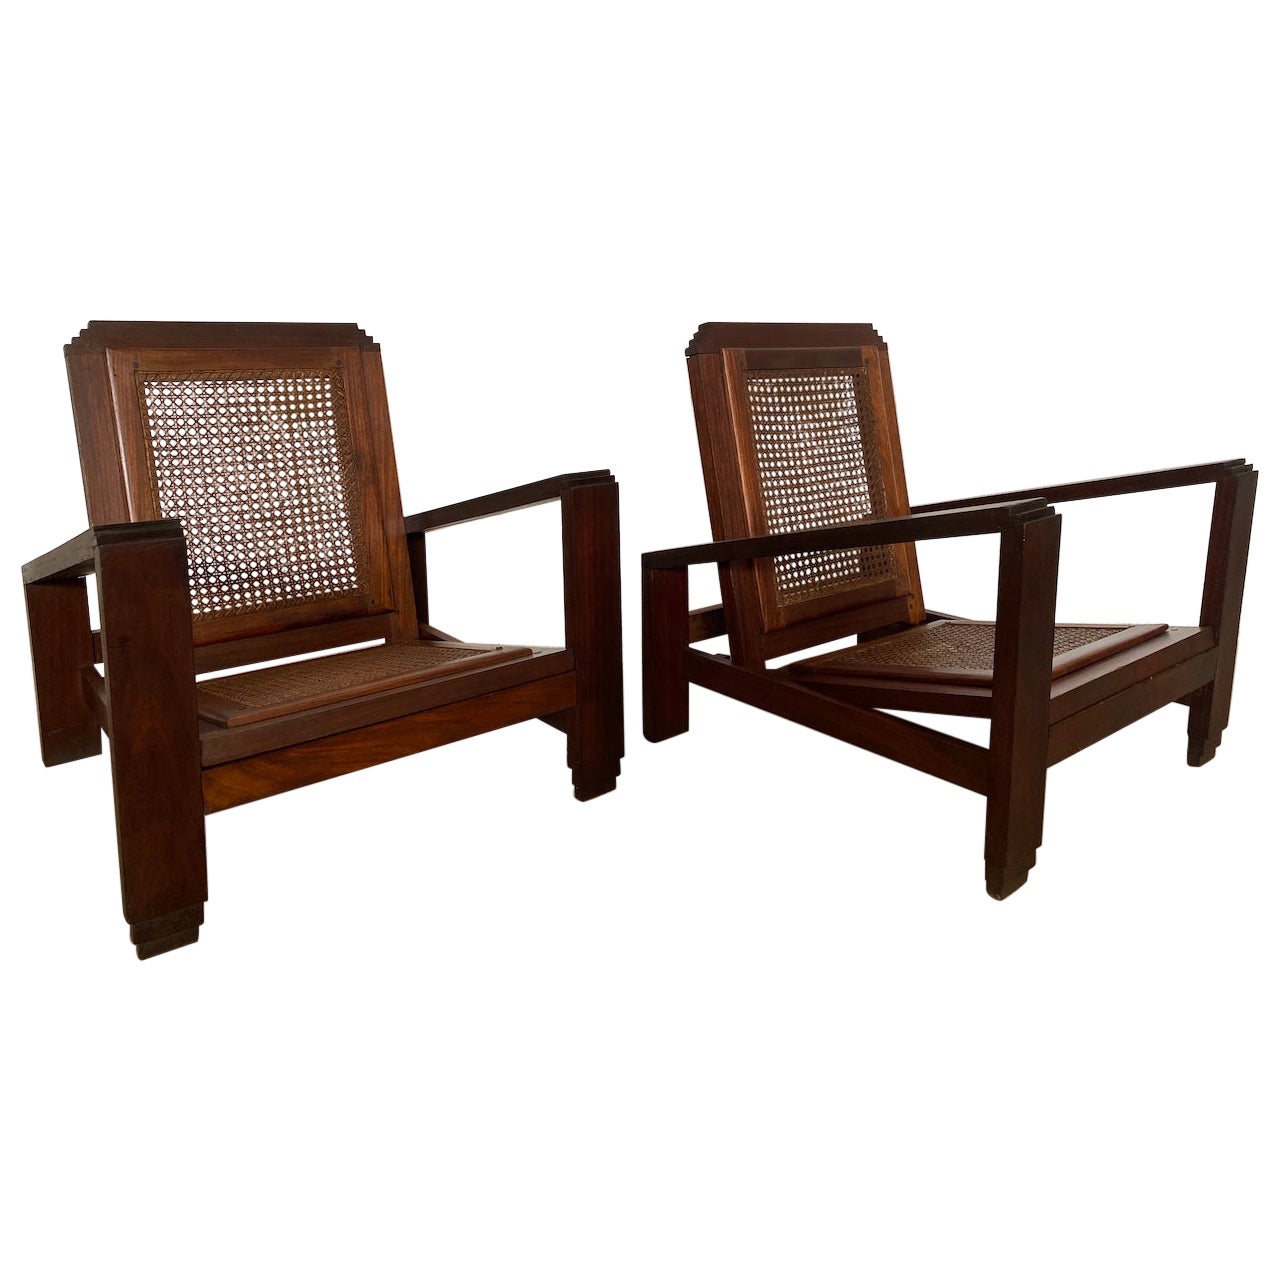 Pair of Art Deco Armchairs, Colonial French Work in Solid Mahogany, 1930